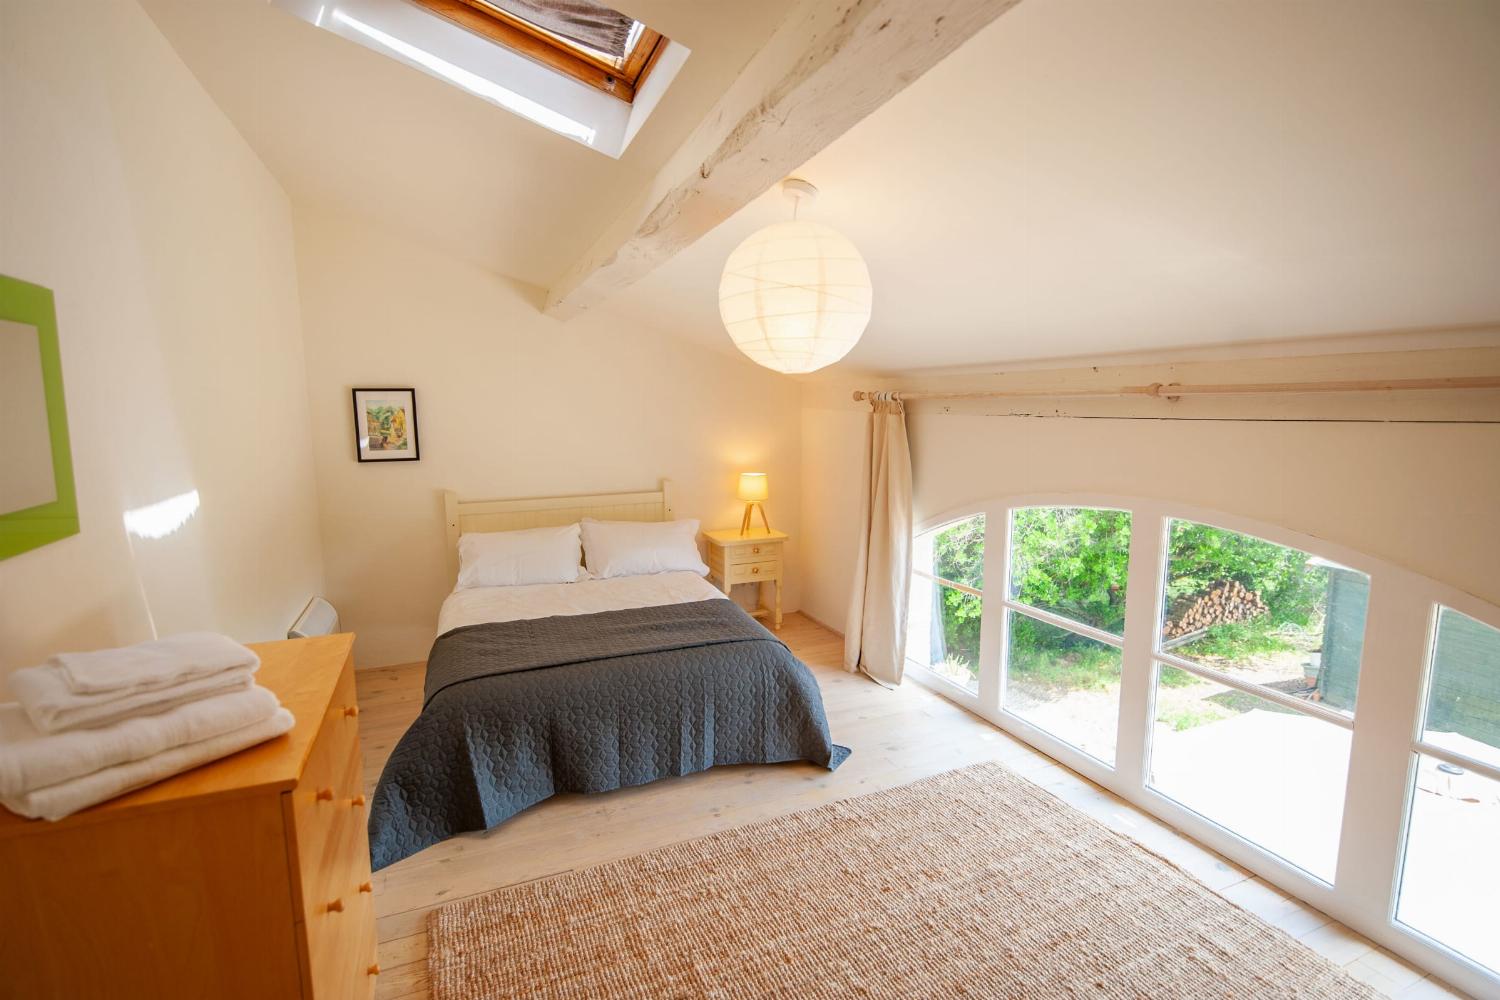 Bedroom | Additional accommodation